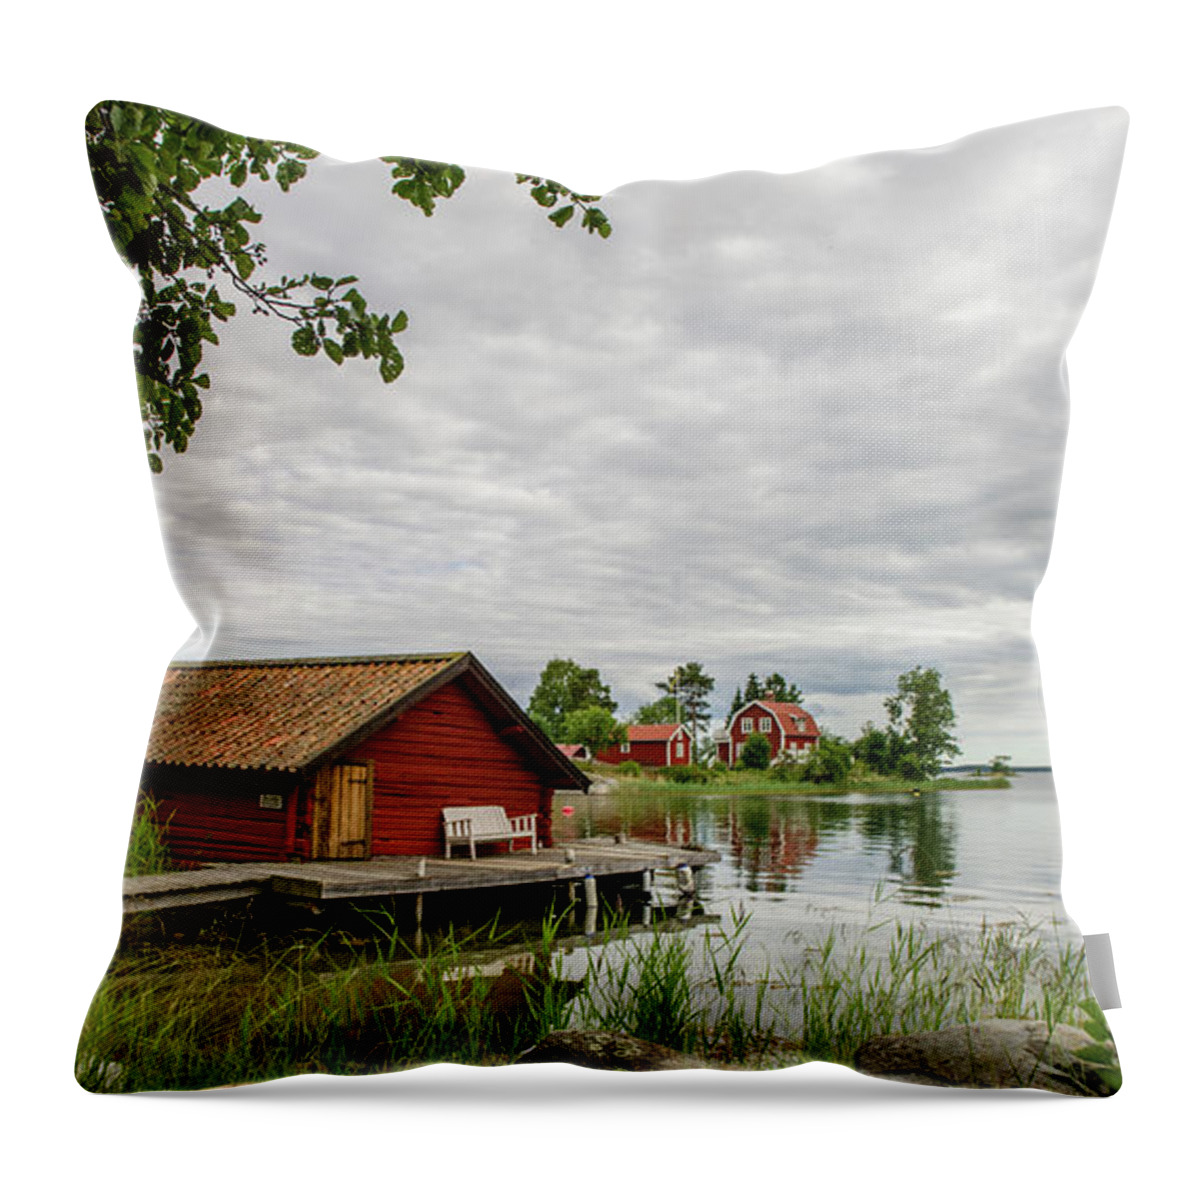 The Old Boat-house Throw Pillow featuring the photograph The old boat-house by Torbjorn Swenelius